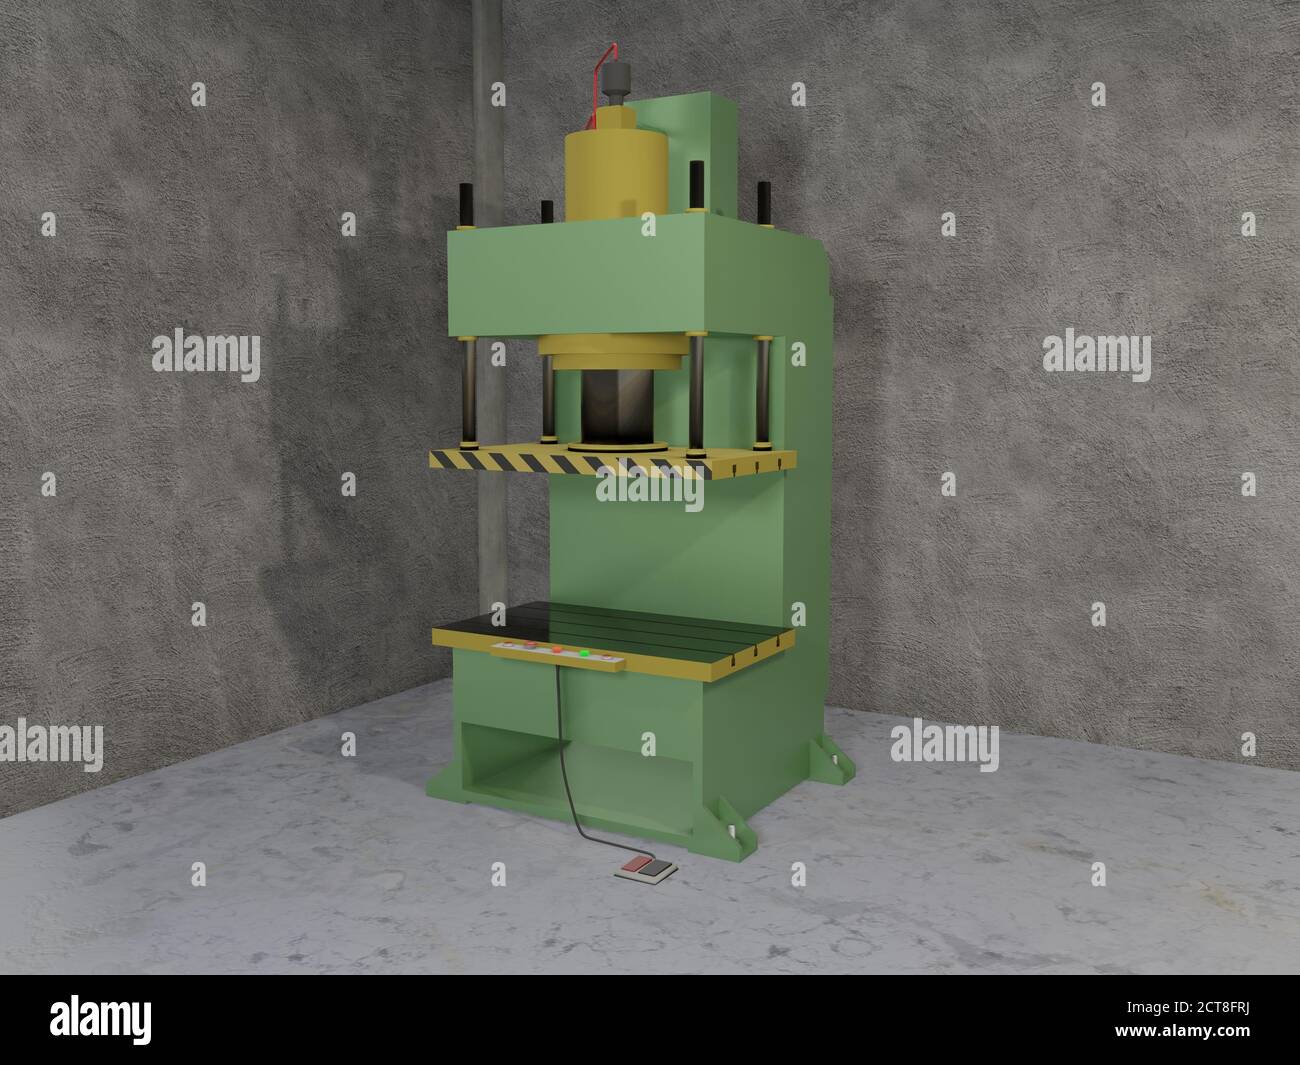 Hydraulic press stamping machine for forming metal sheet. Industrial  metalwork manufacturing. 3D rendering image Stock Photo - Alamy